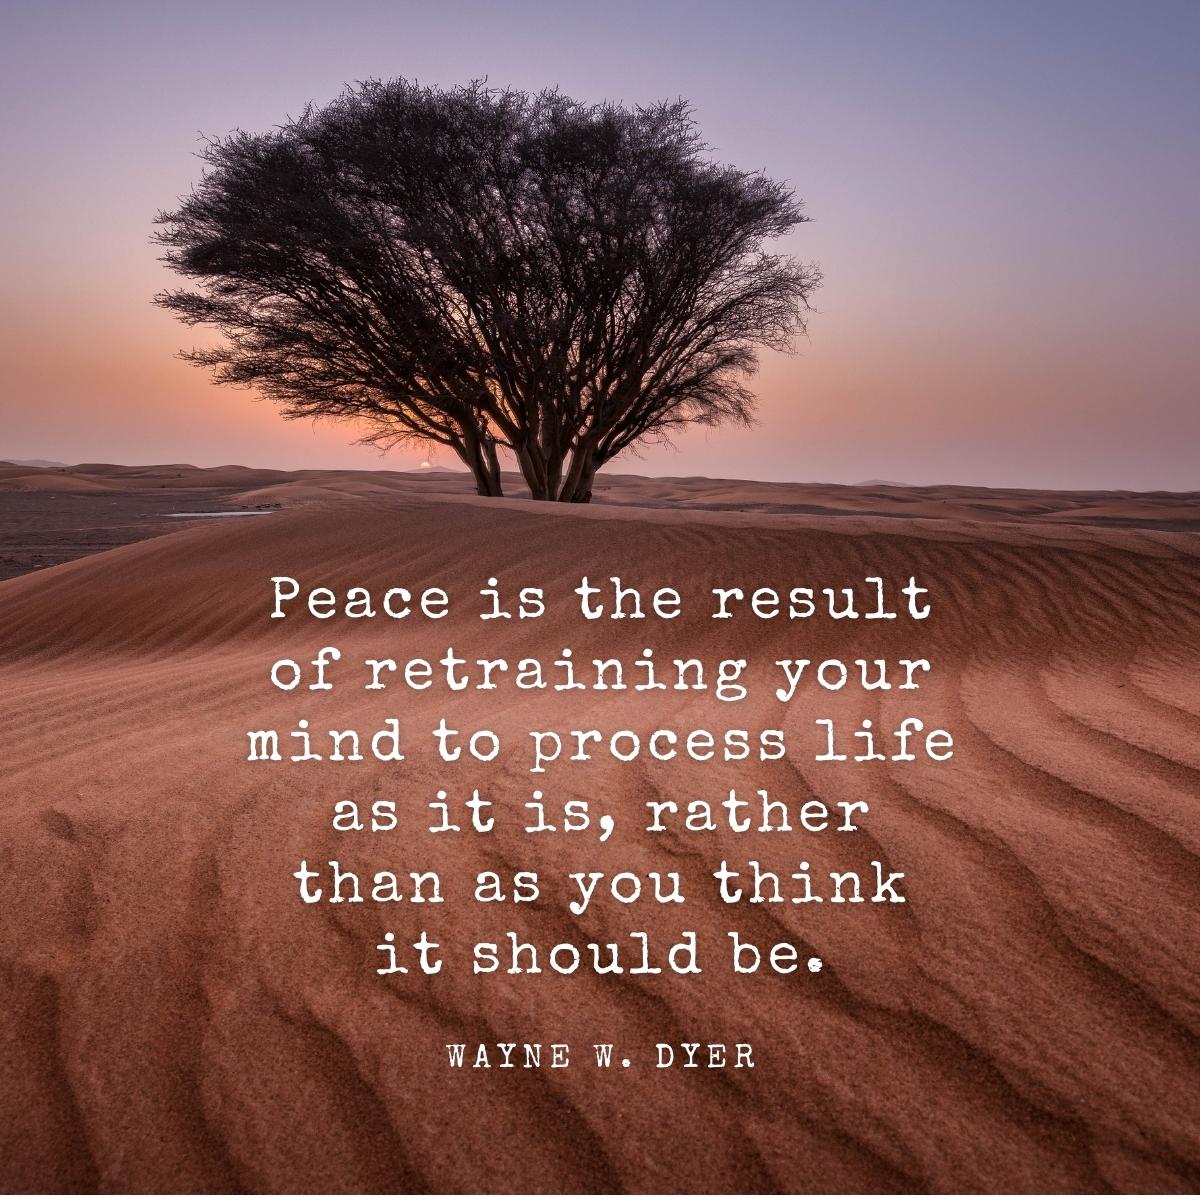 Retraining your mind for inner peace quote. 